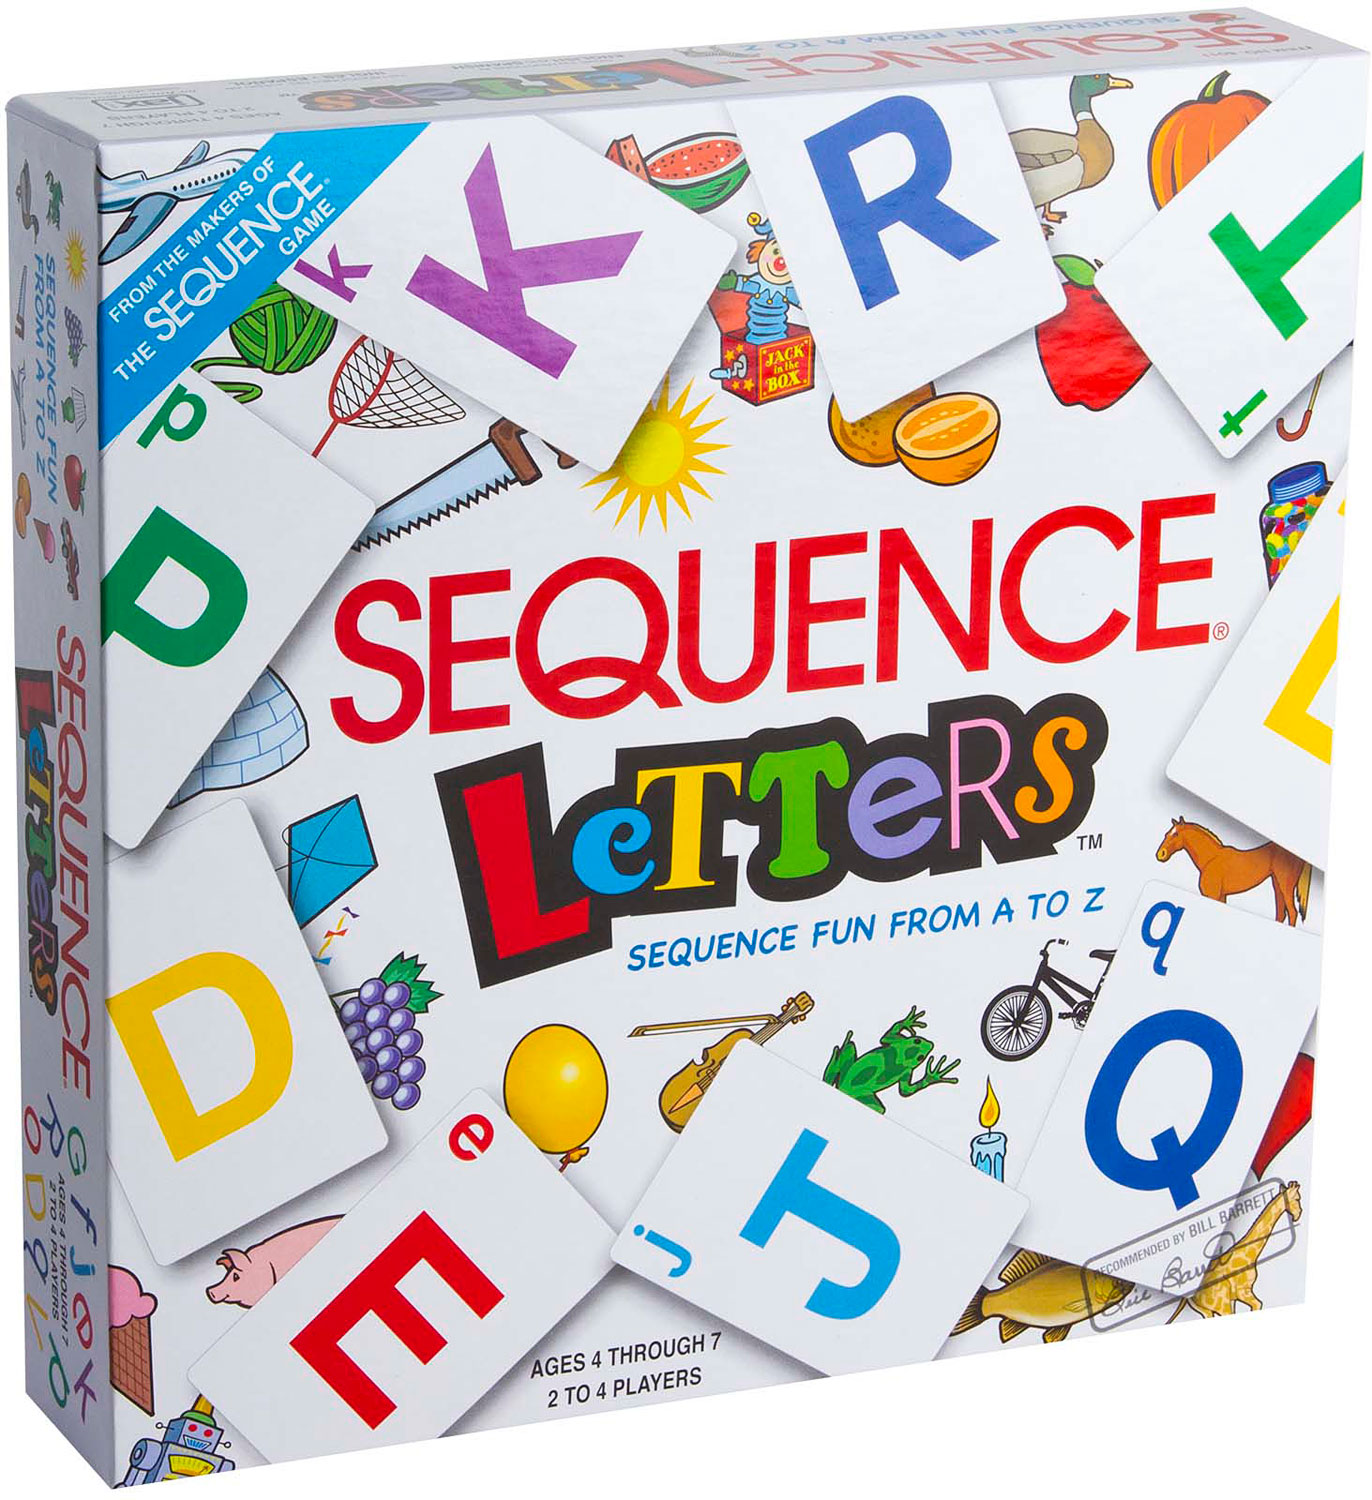 Sequence LeTTeRs